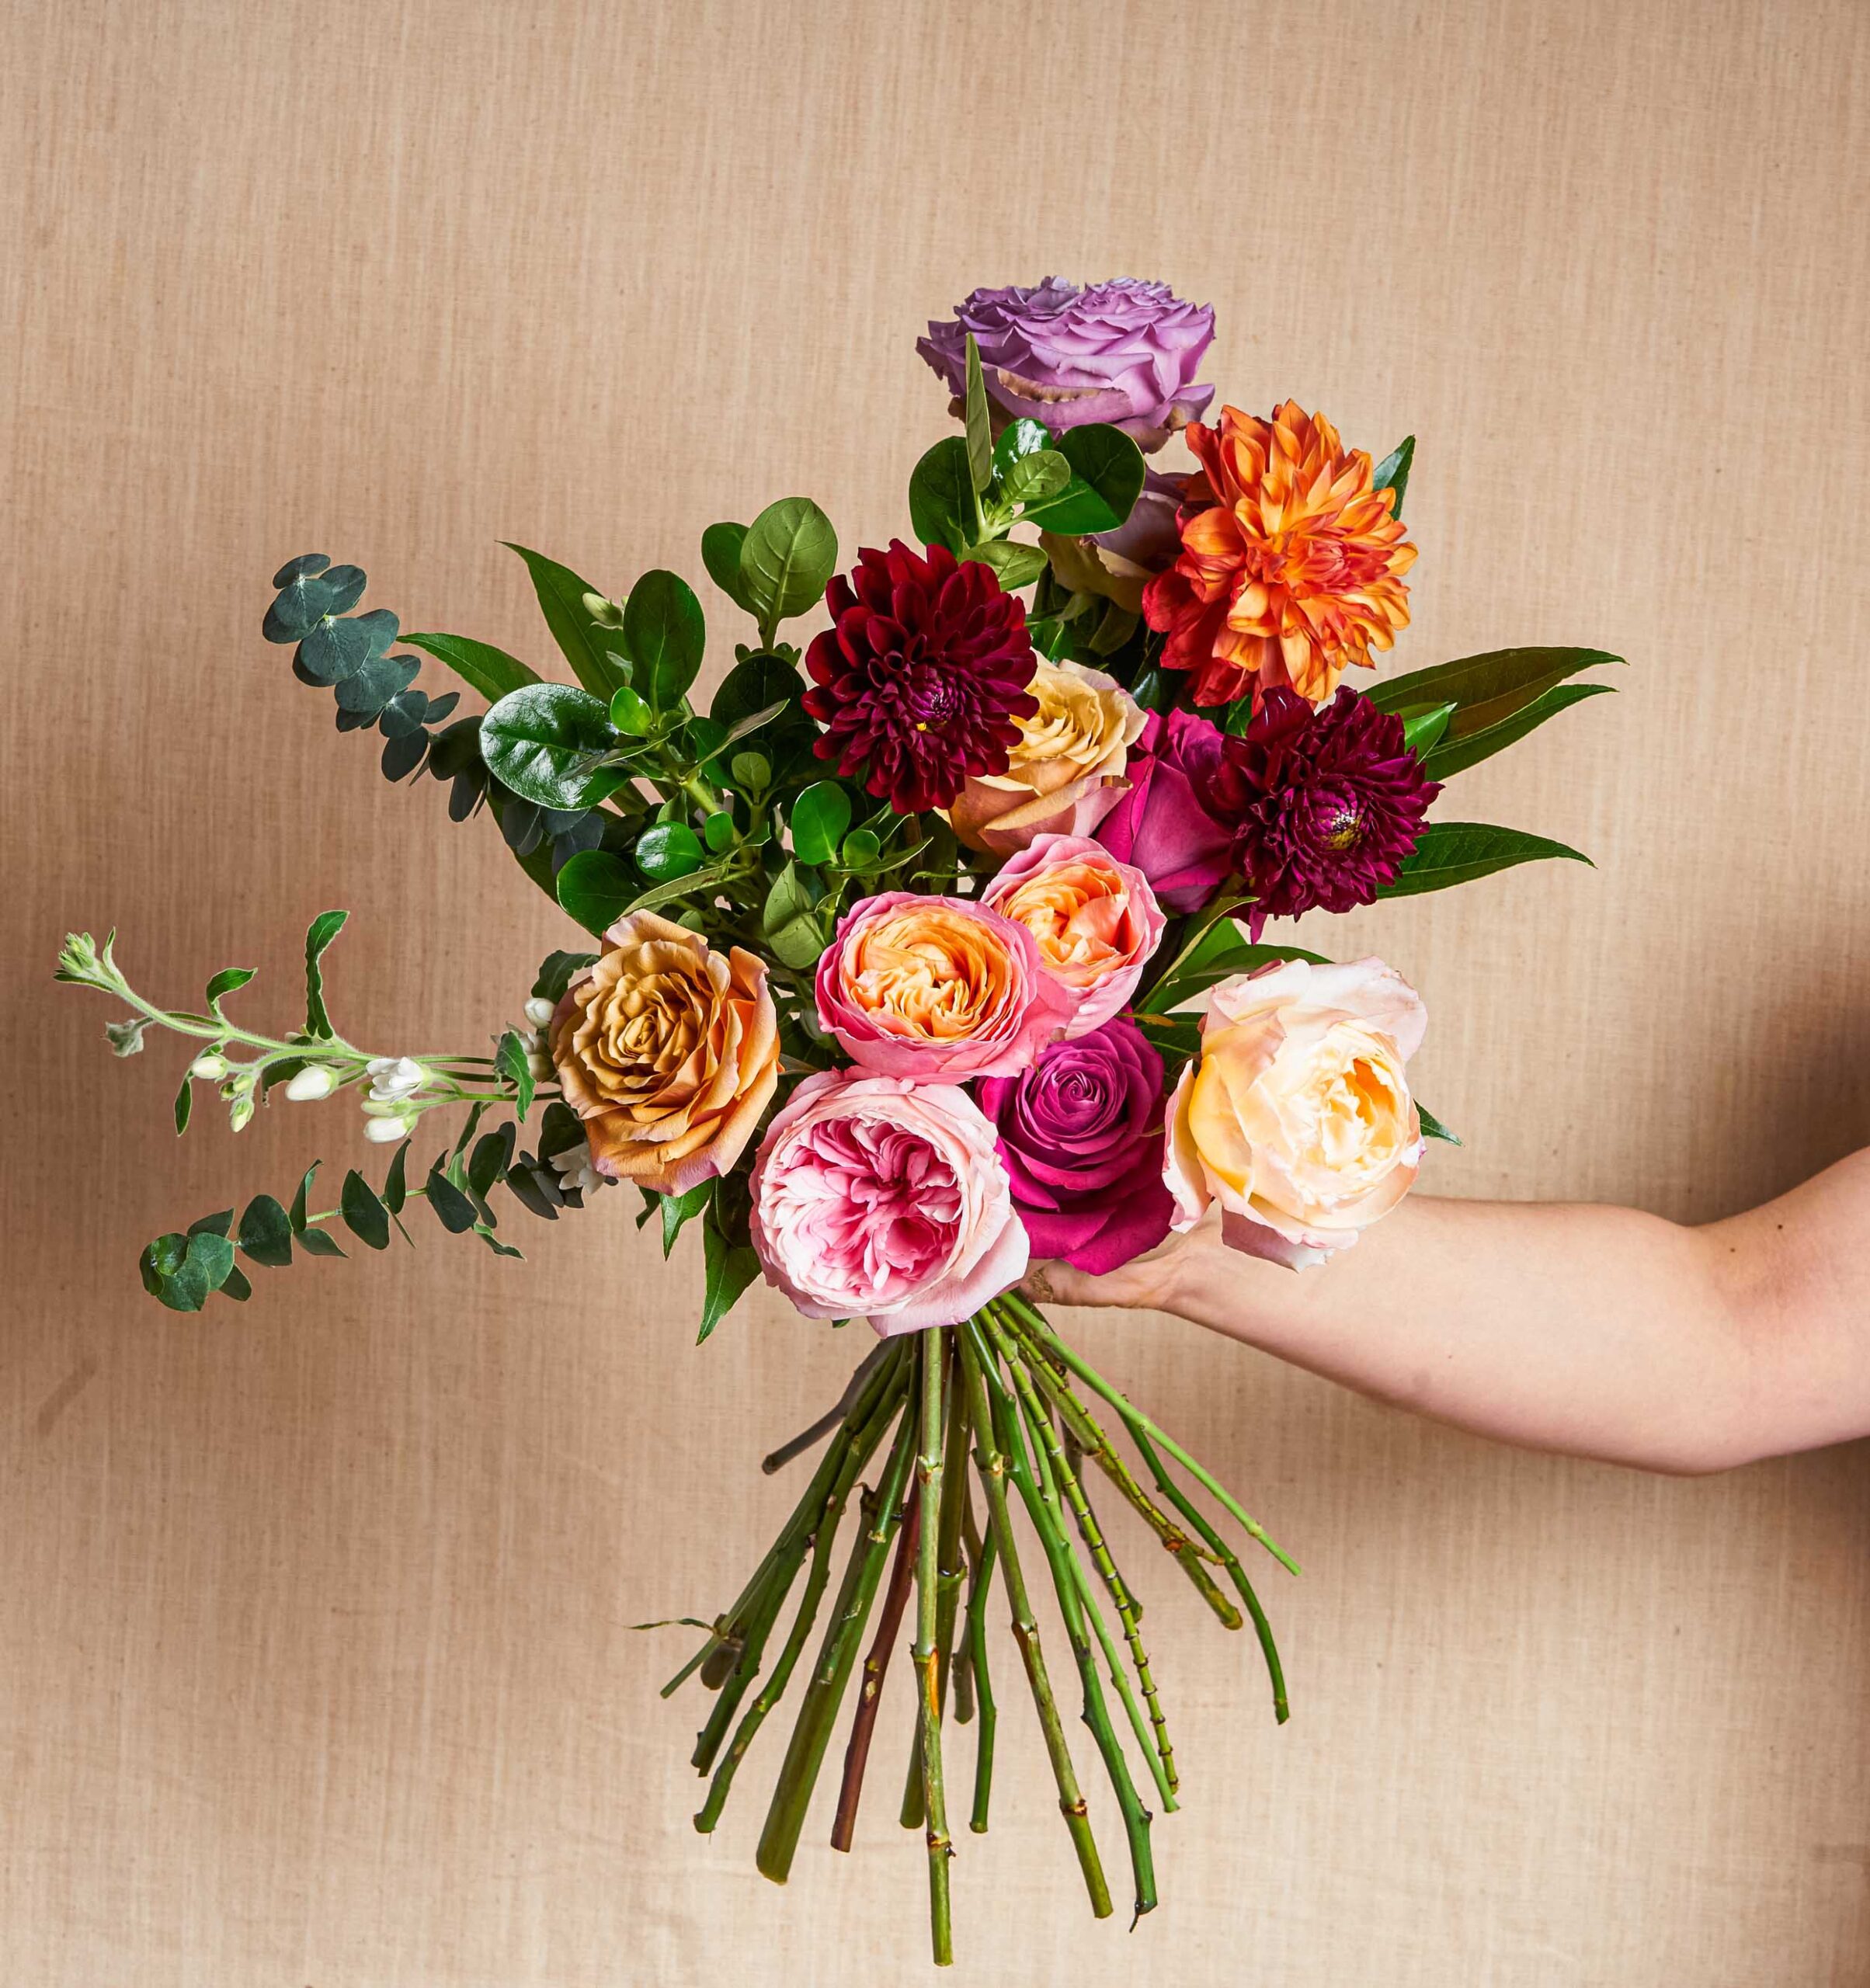 Colorful roses and dahlias arrangement in a hand